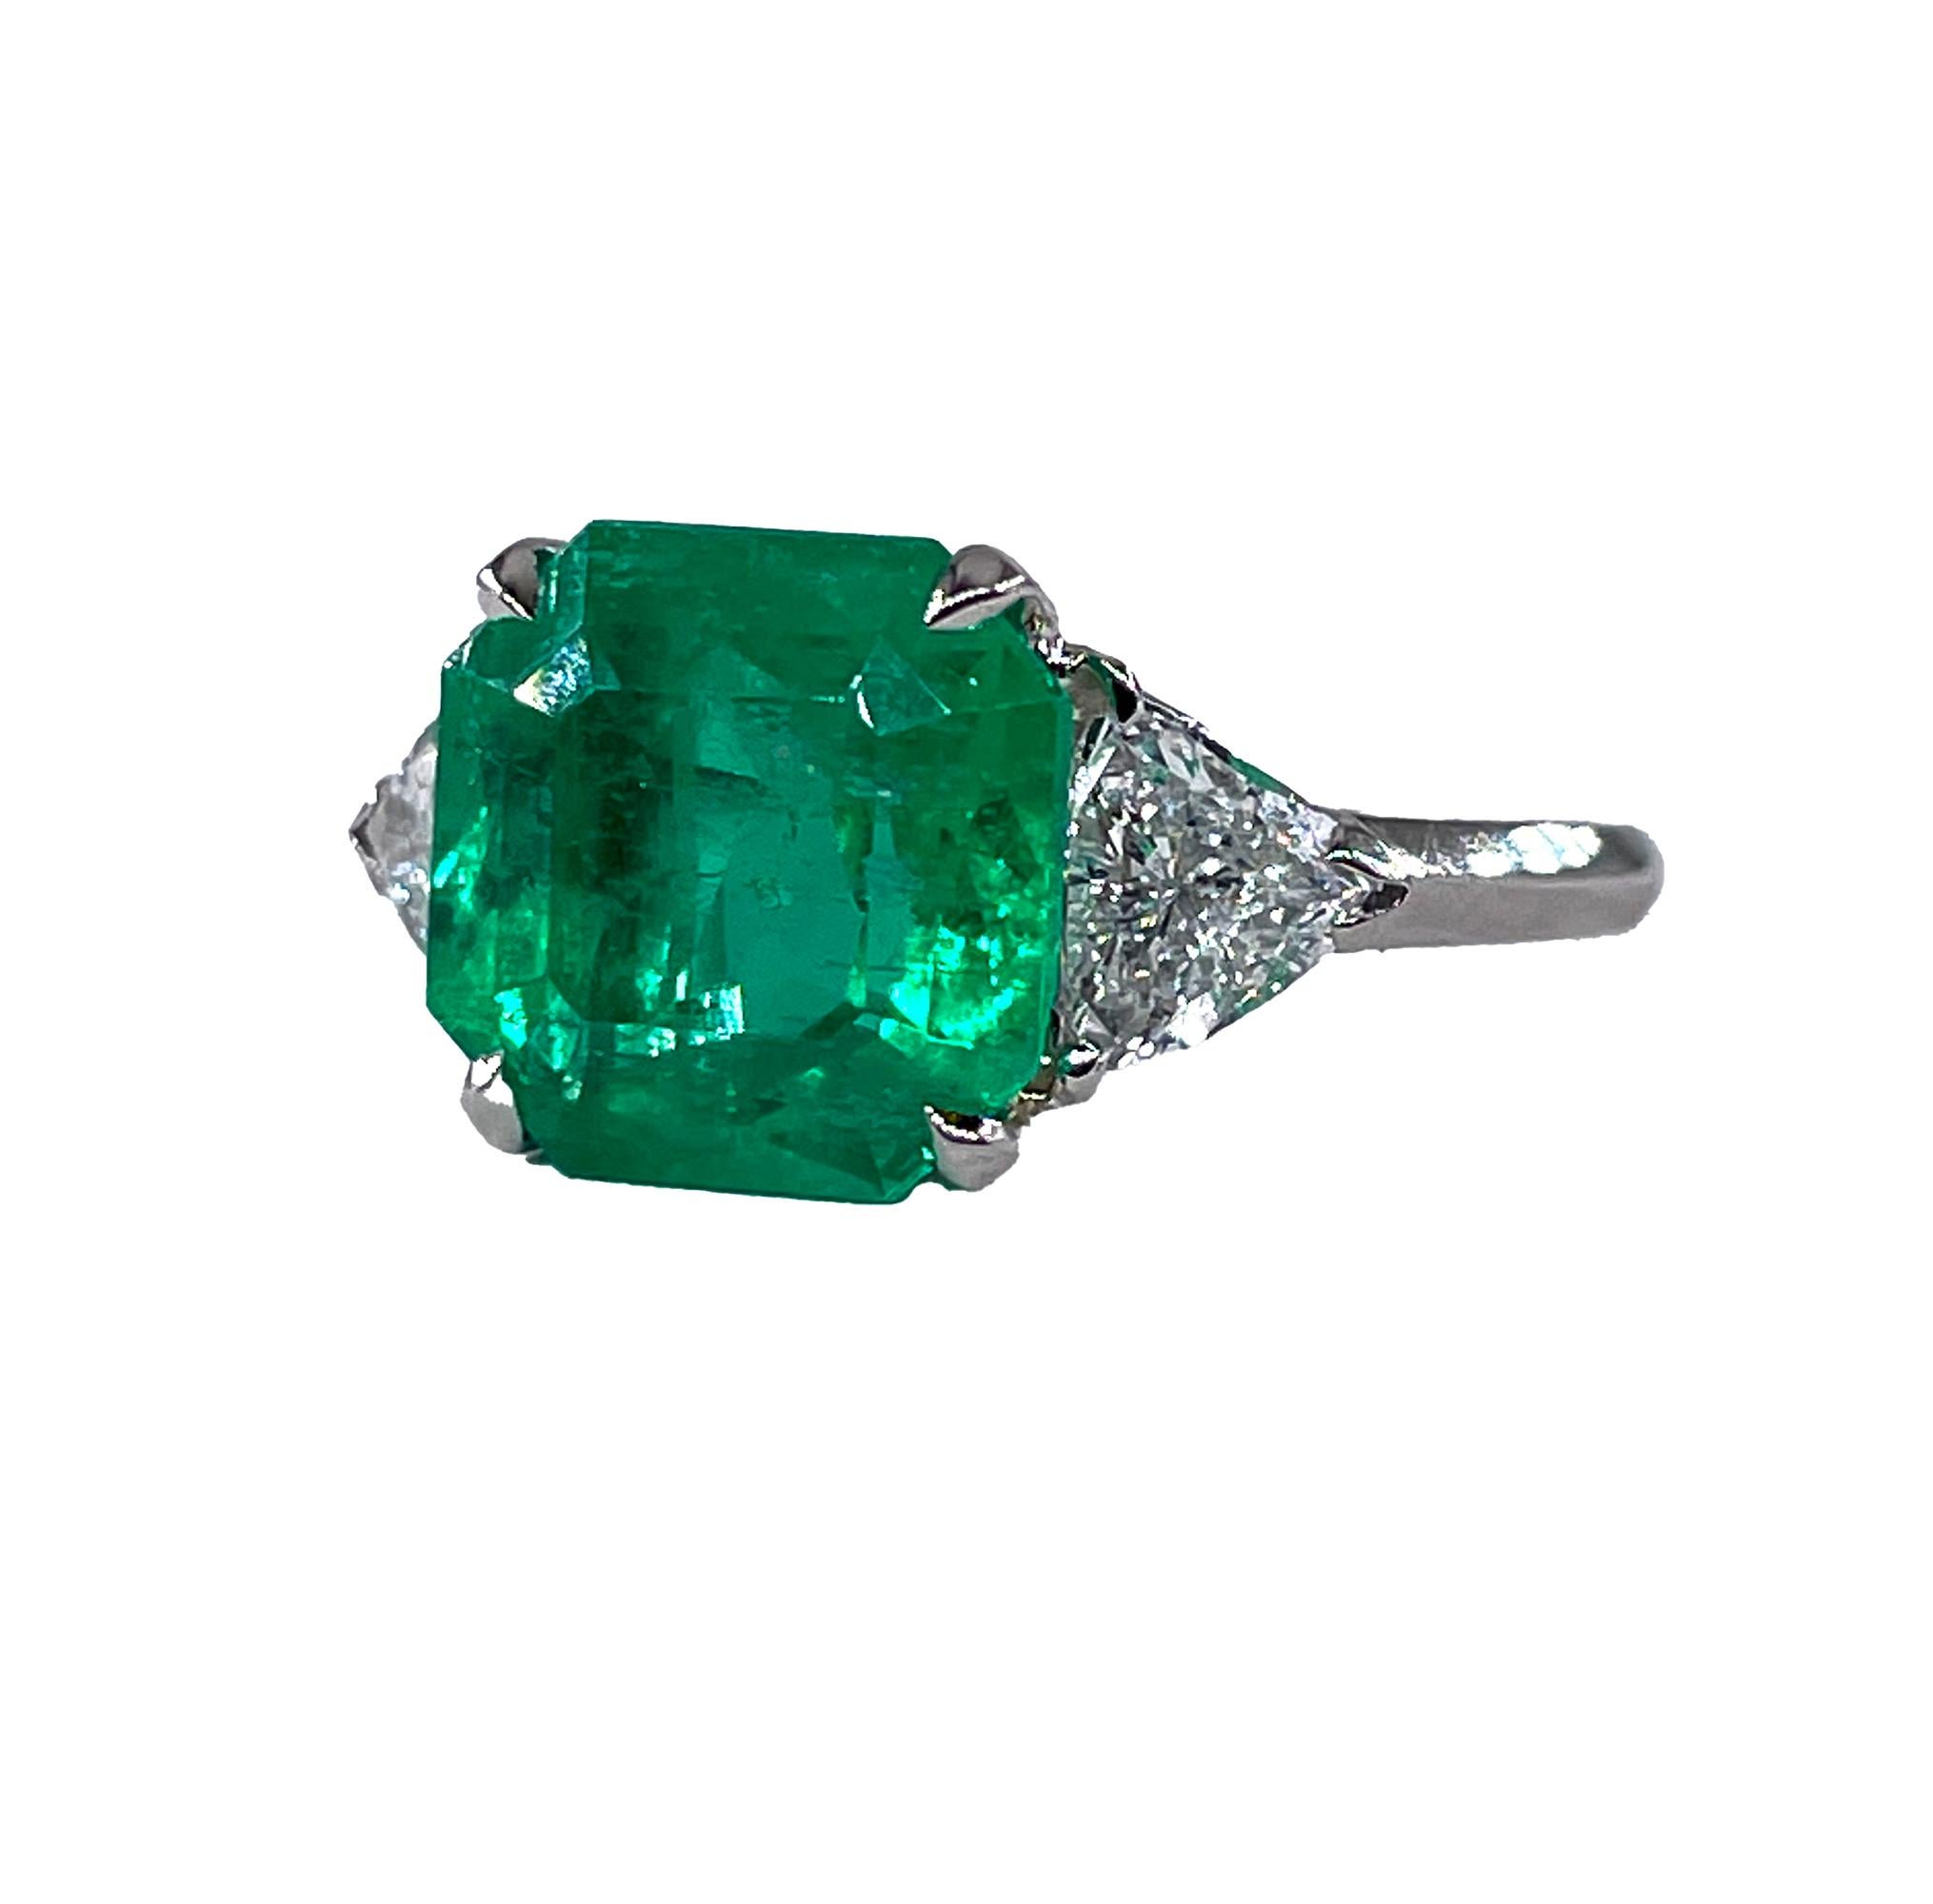 A Breathtaking Estate Vintage HANDMADE GIA certified 5.28ct Colombian Green Emerald and Diamond Three-Stone Platinum (tested) Ring signed by Van Cleef and Arpels.

The Prong Set Emerald cut Colombian Green Emerald is GIA Certified 3.58ct with